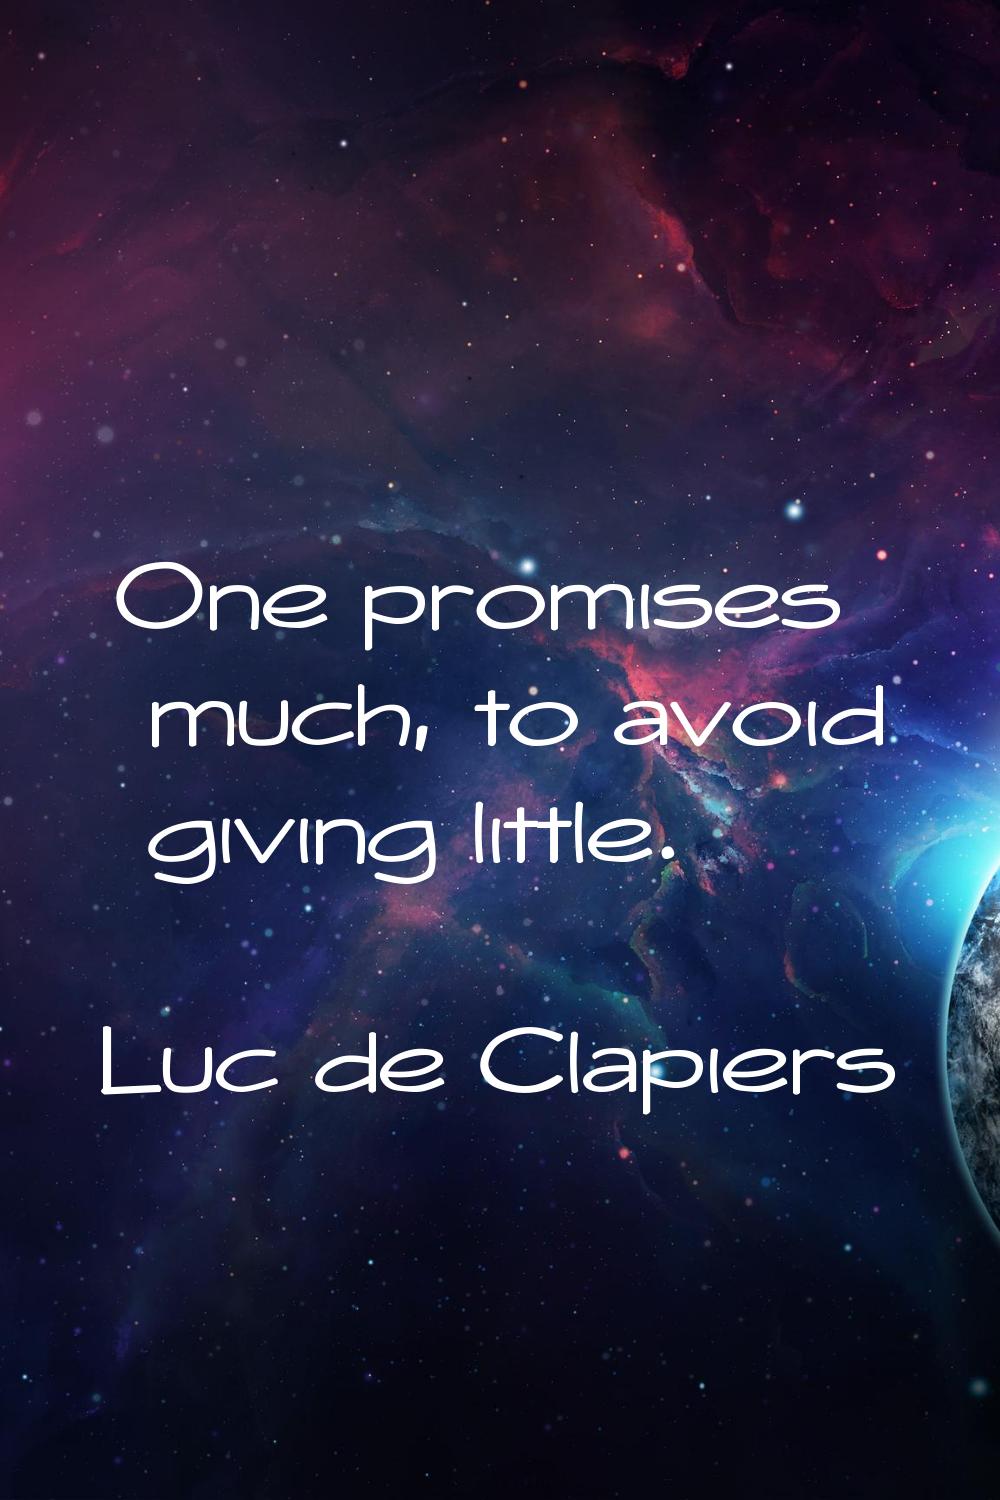 One promises much, to avoid giving little.